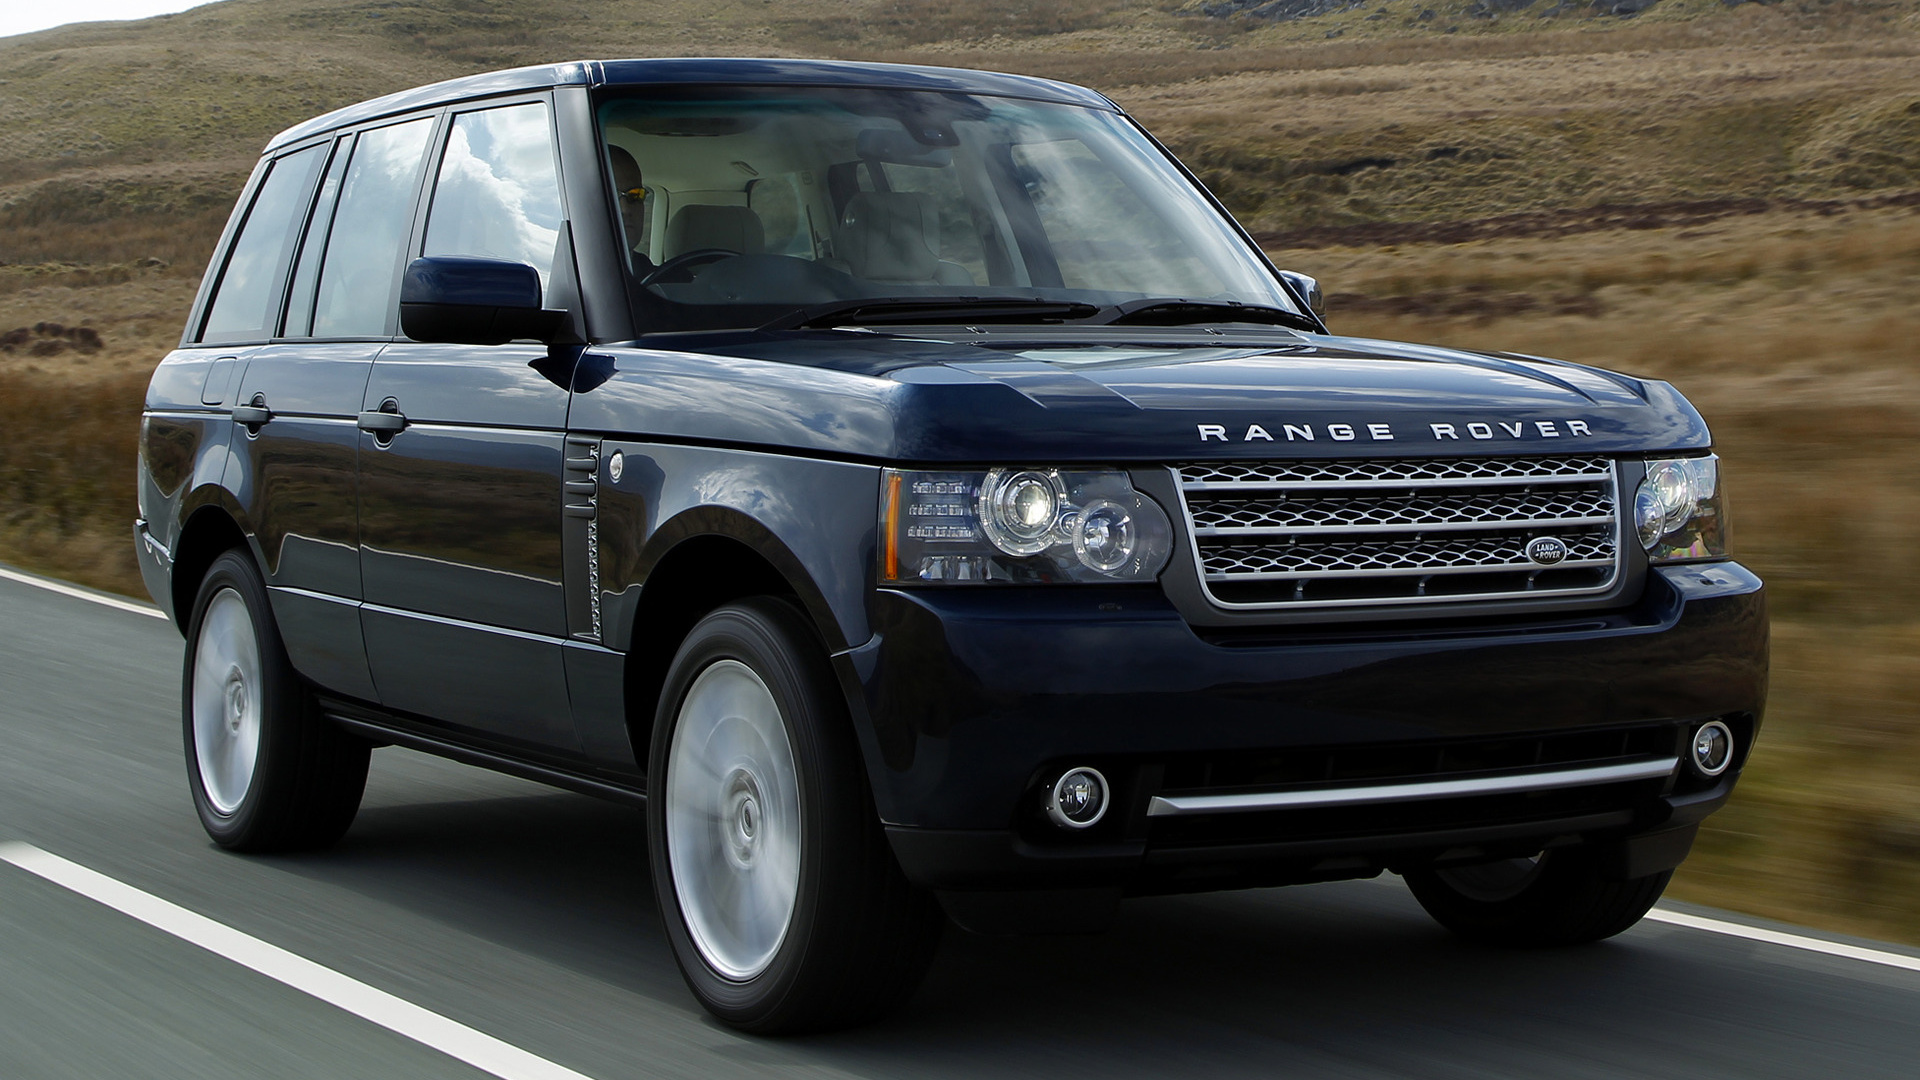 2009 Range Rover Autobiography (UK) - Wallpapers and HD Images | Car Pixel